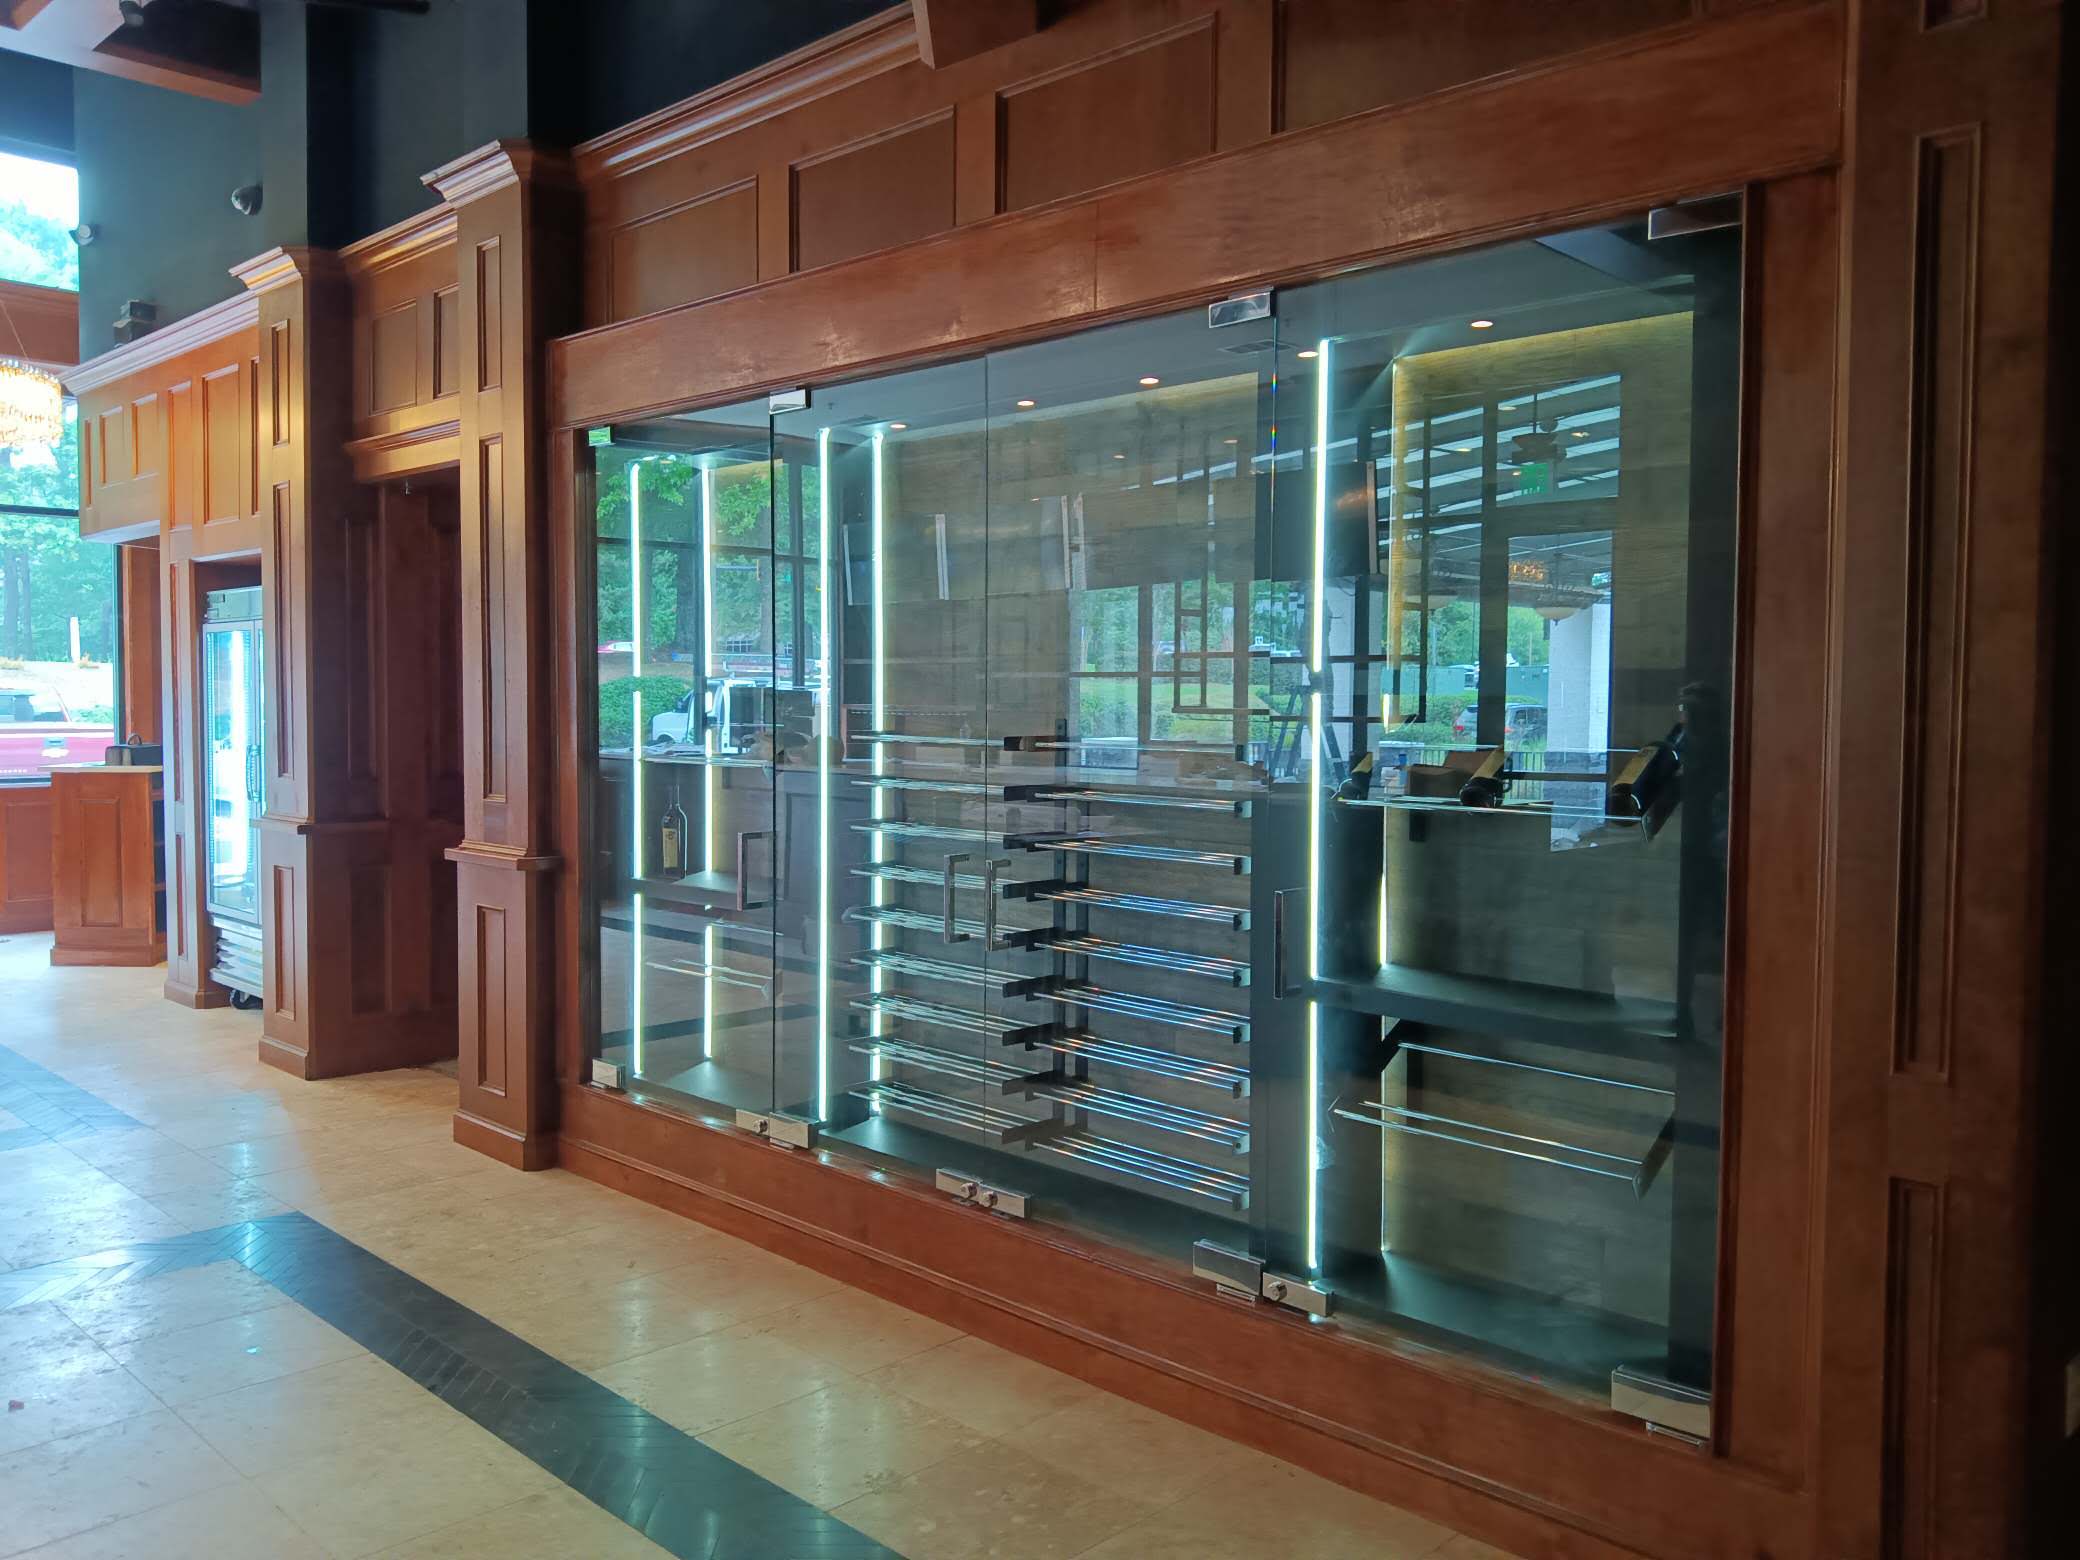 These wine doors for Luci's Kitchen in Alpharetta are a stunning feature to show off their wine selection for this new restaurant! 